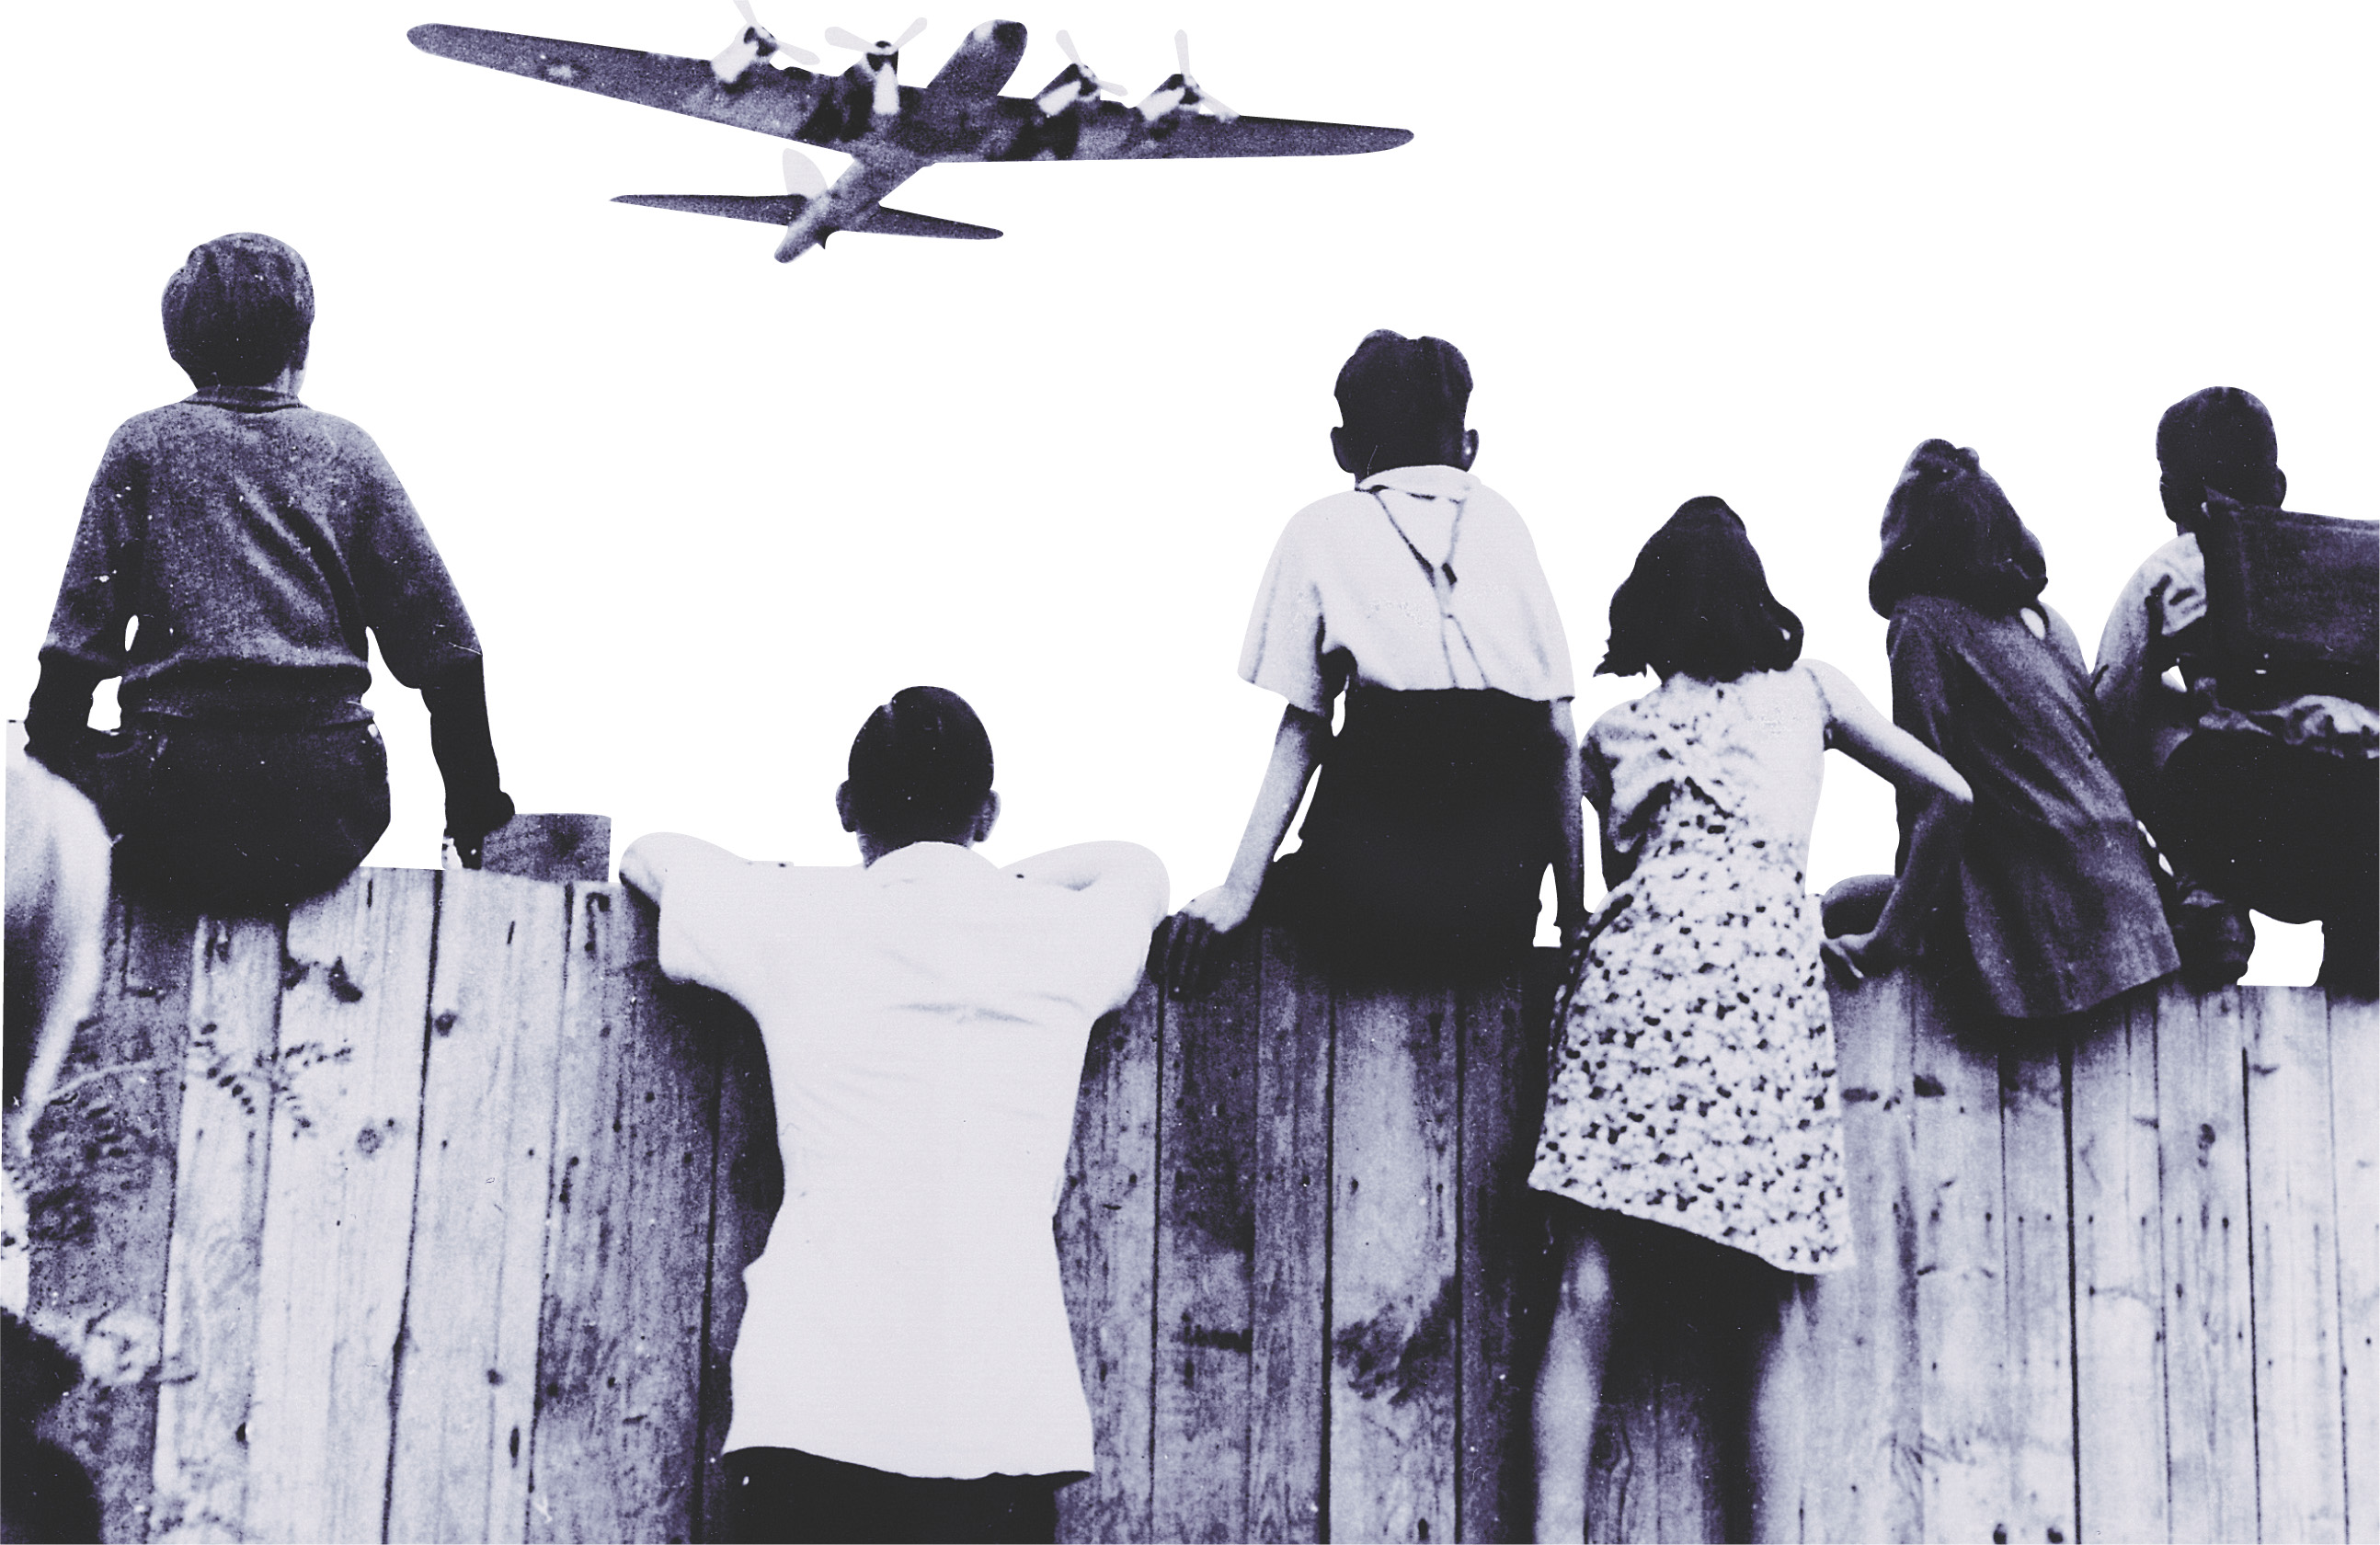 Photo: Children sit on a fence, watching a plane fly low overhead